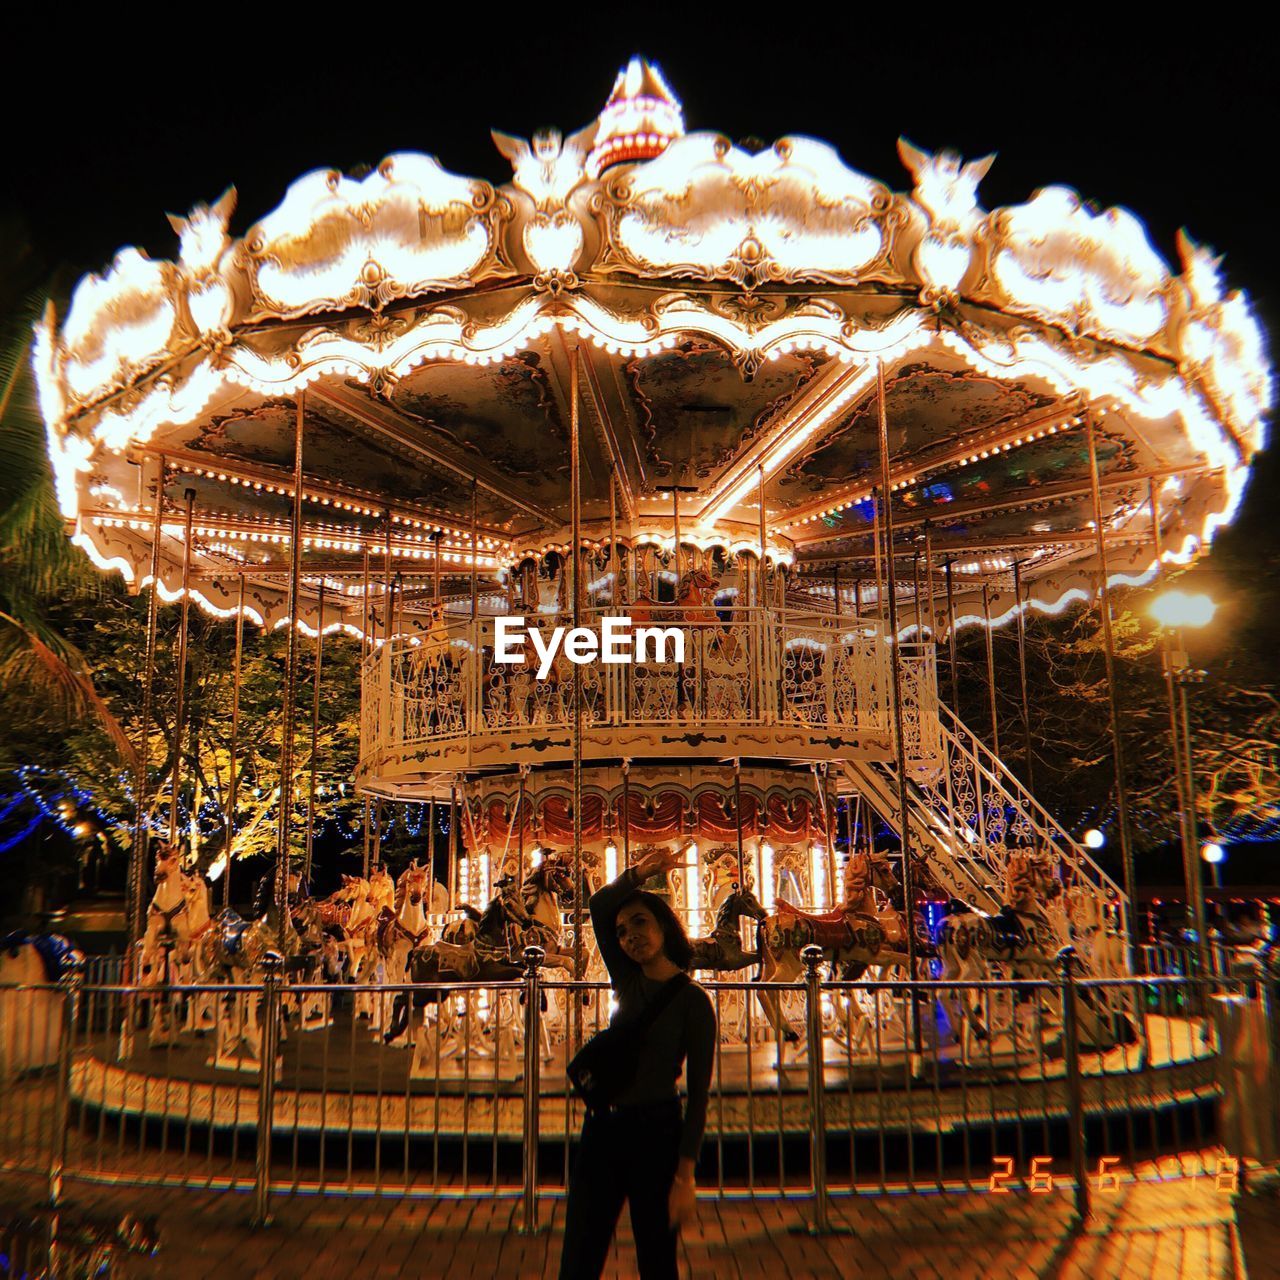 Young woman standing against illuminated carousel in amusement park at night